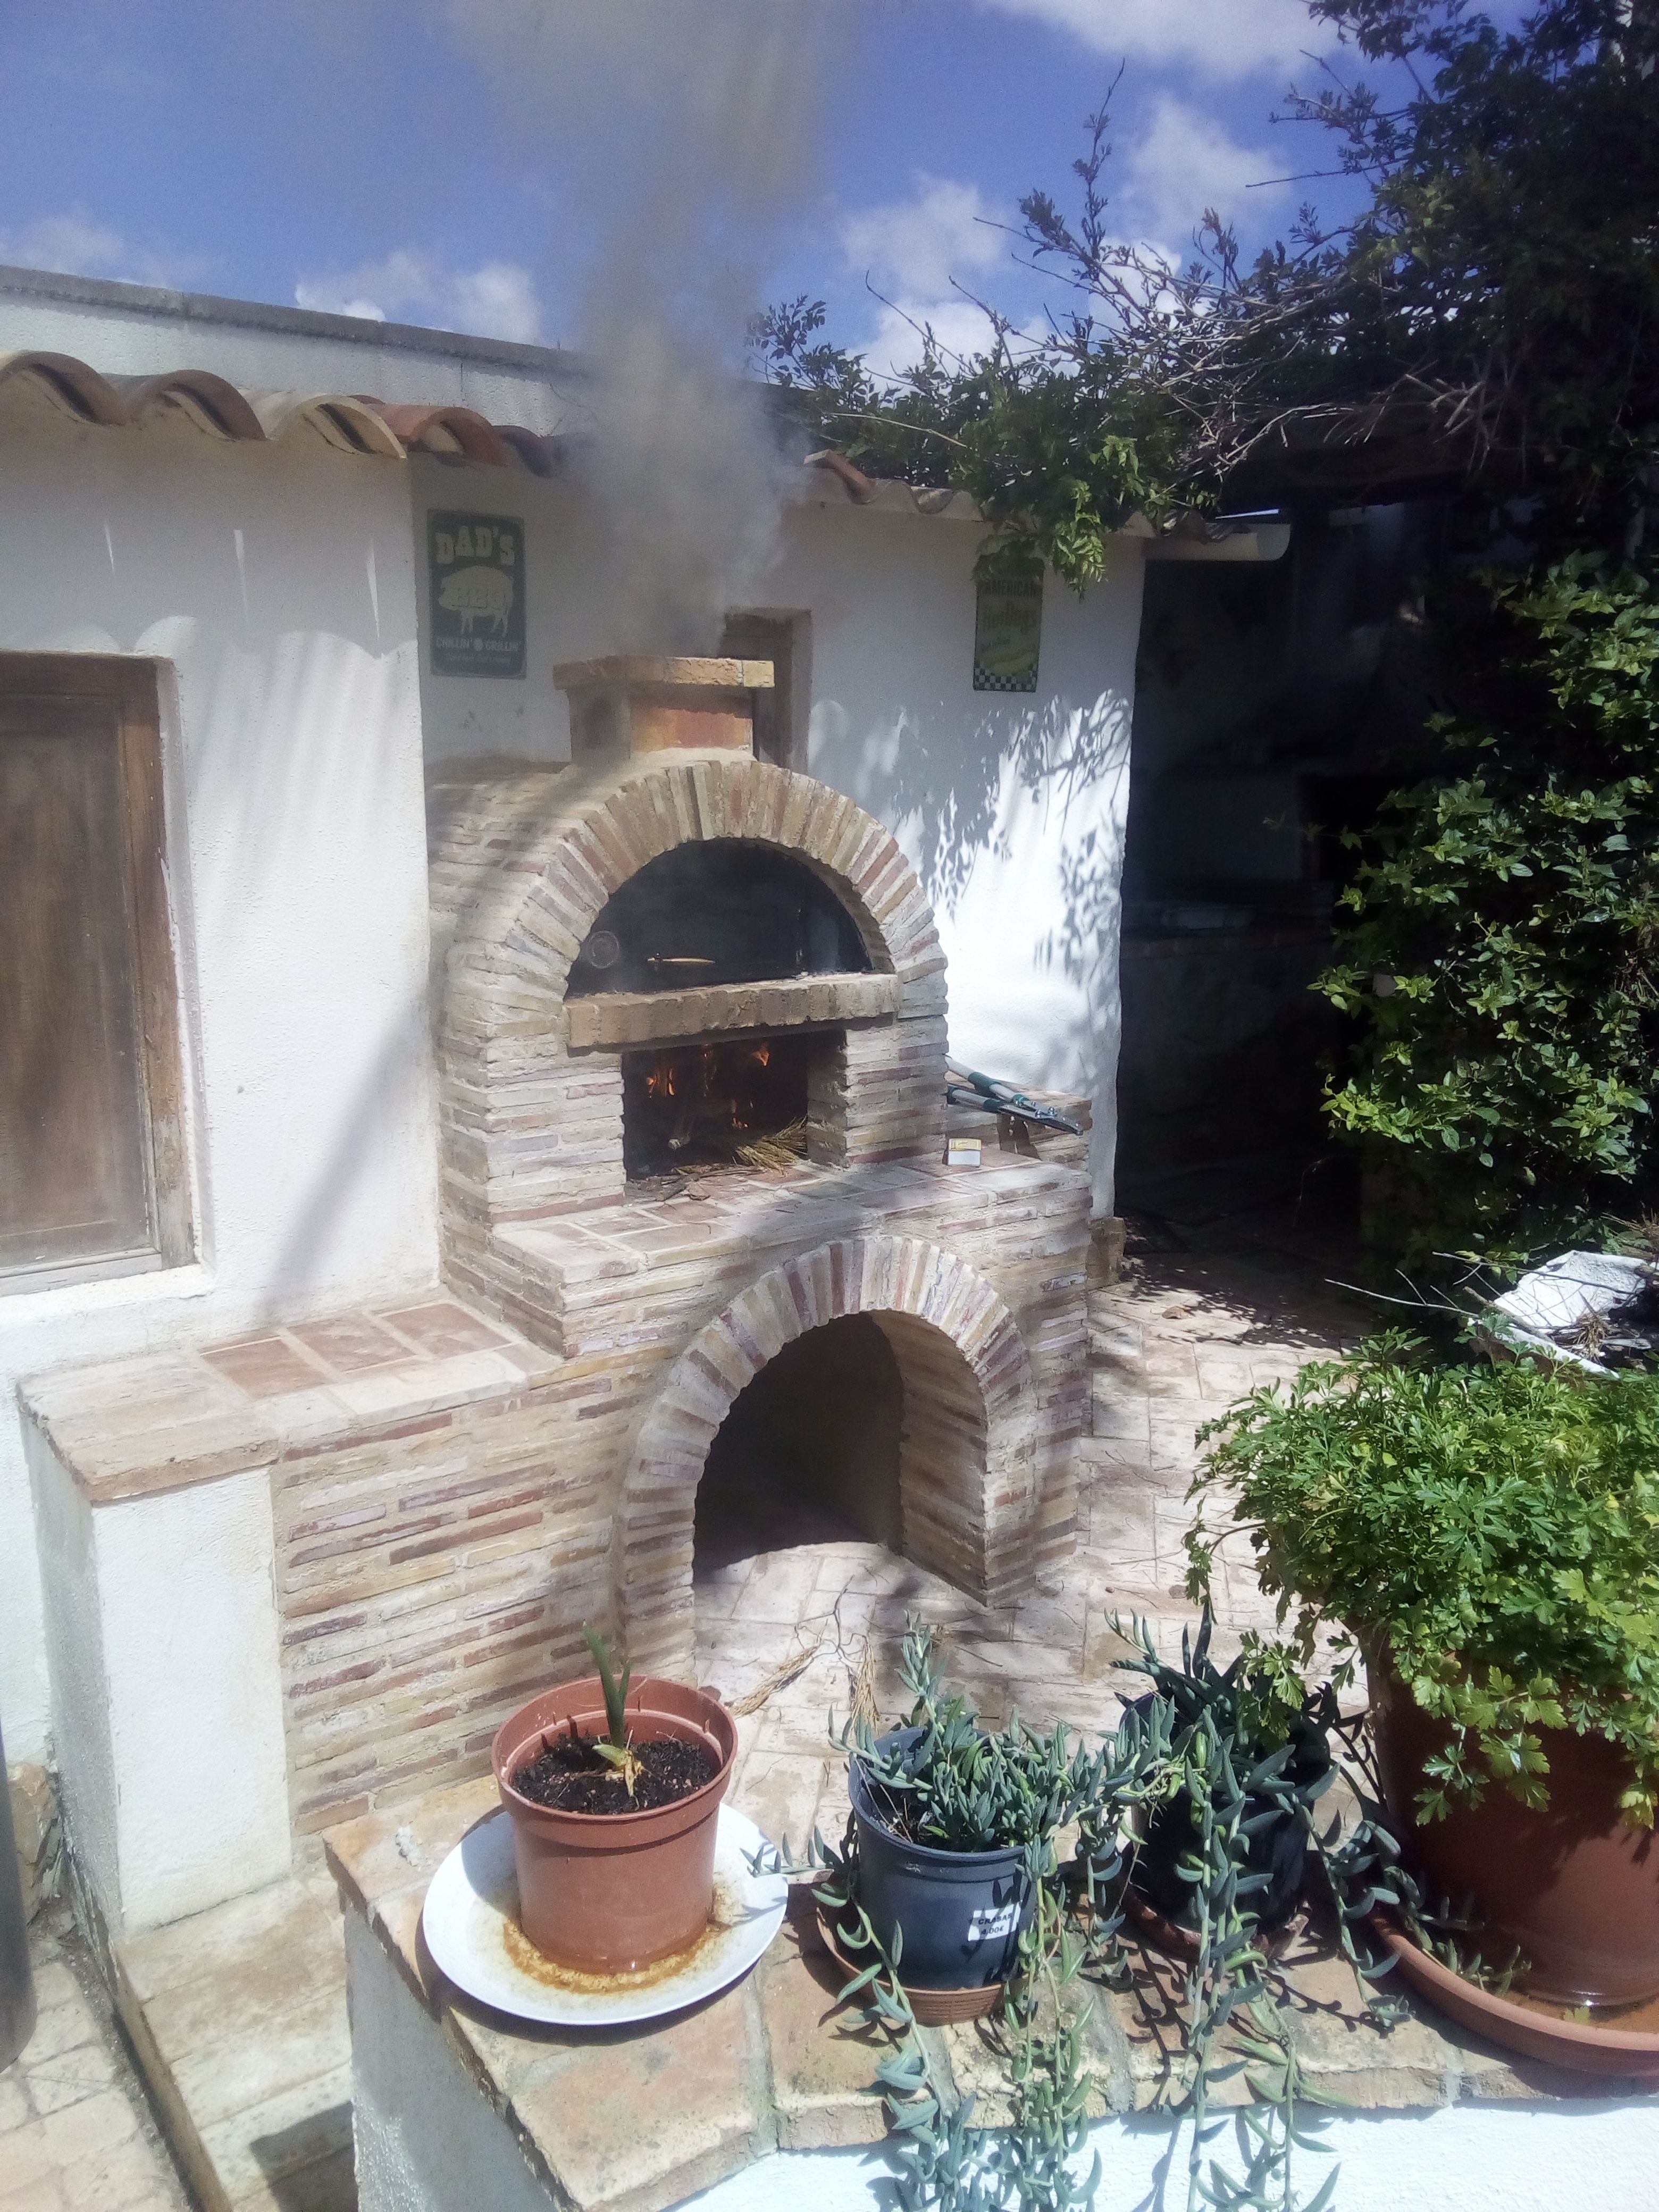 Fresh Traditional Pizza Cooked on your Outdoor Pizza Oven